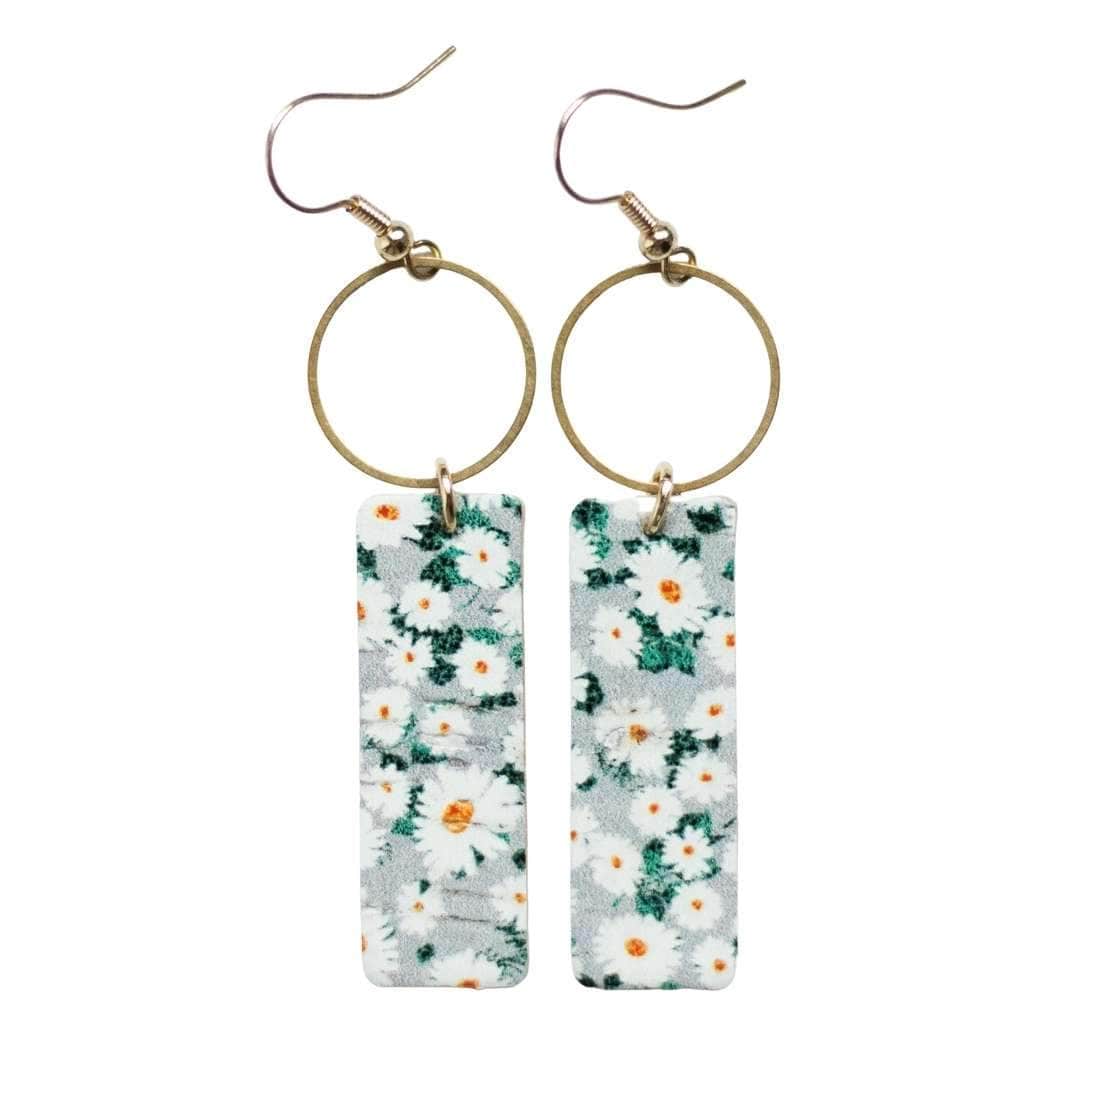 Sela Design Meadow Mia Earrings with white daily floral pattern on rectangular leather pieces adorned with circle brass charm at top of earring